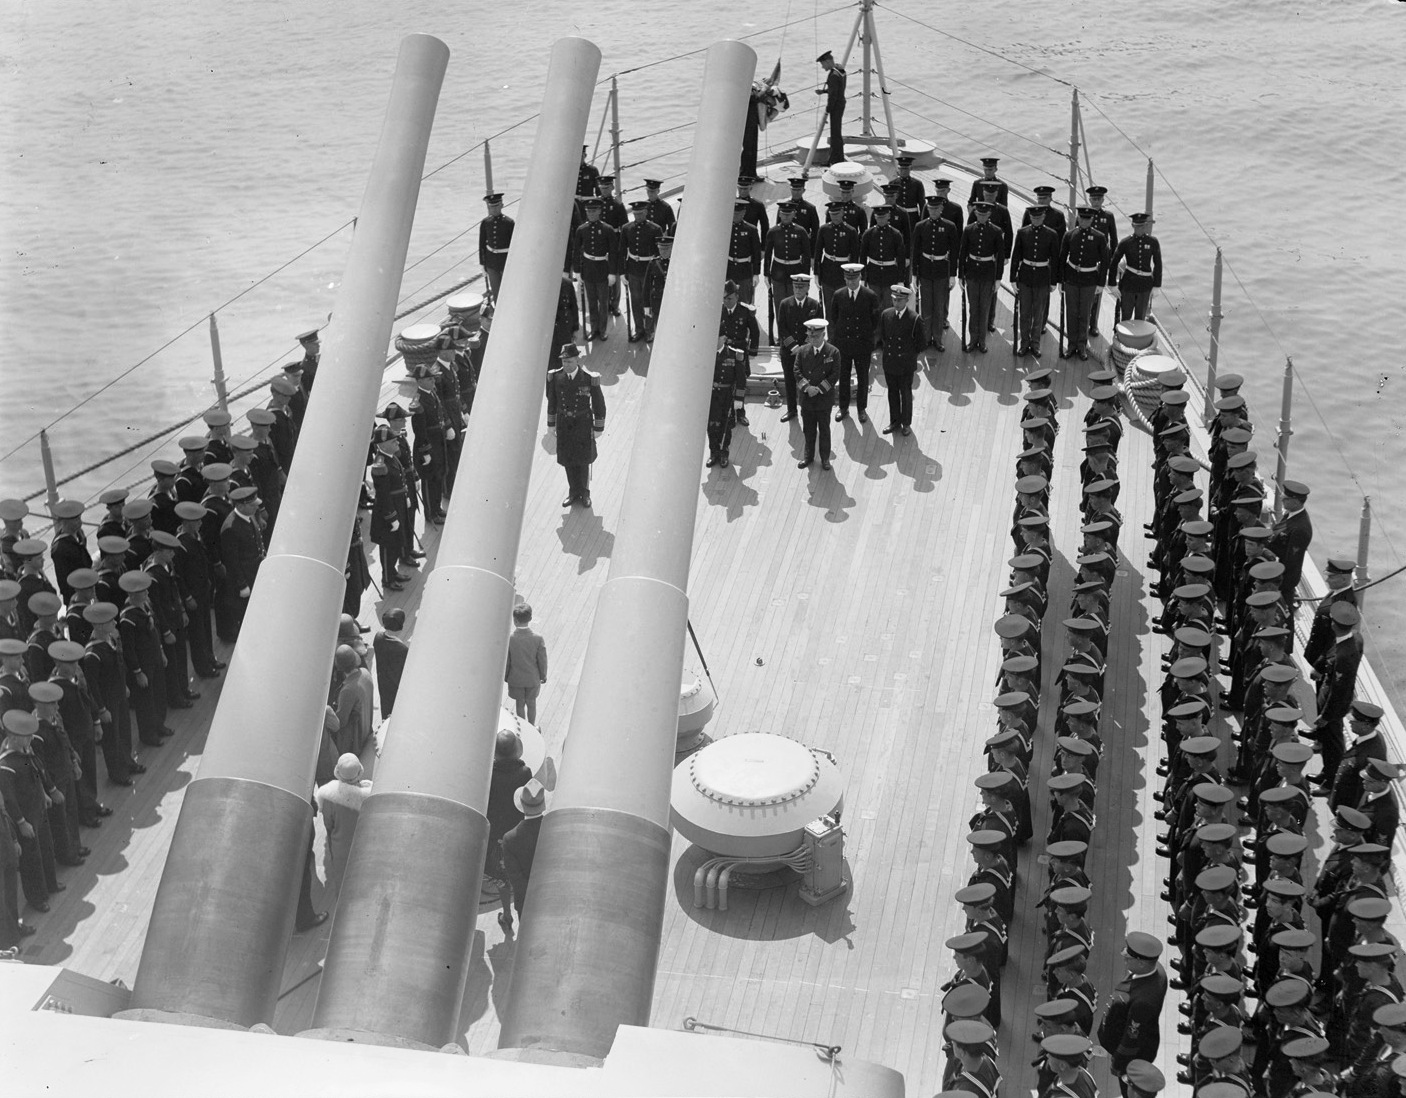 Commissioning ceremonies aboard the cruiser Northampton at the Bethlehem Steel Fore River Shipyard in Quincy, Massachusetts, United States, 17 May 1930. Note the senior officers in their cocked hats.